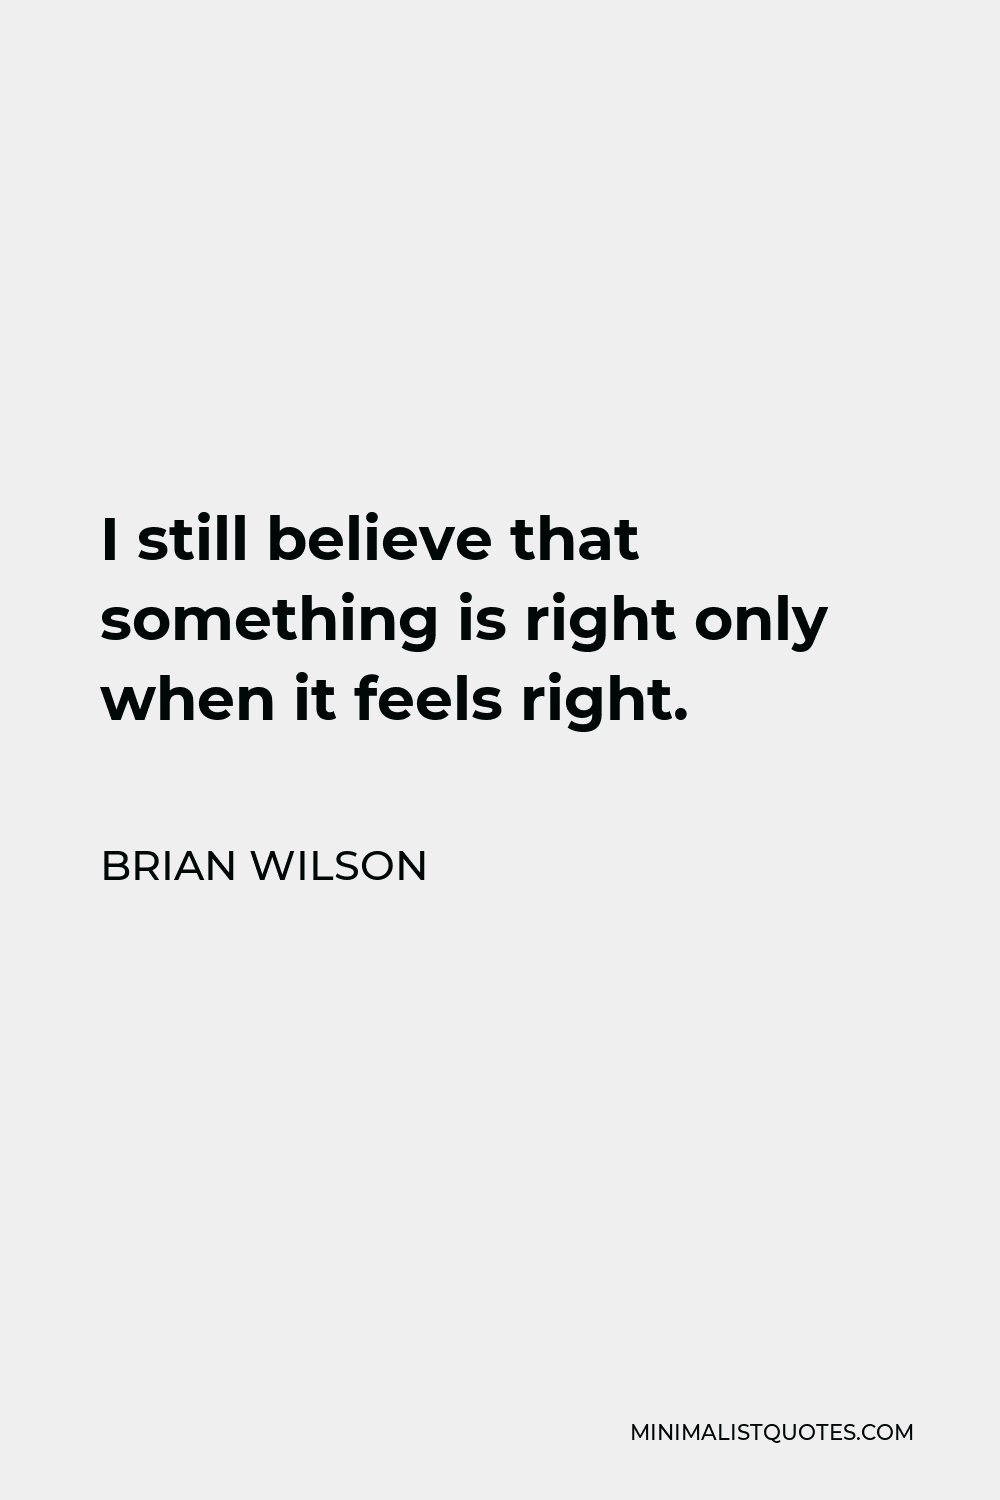 Brian Wilson Quote - I still believe that something is right only when it feels right.